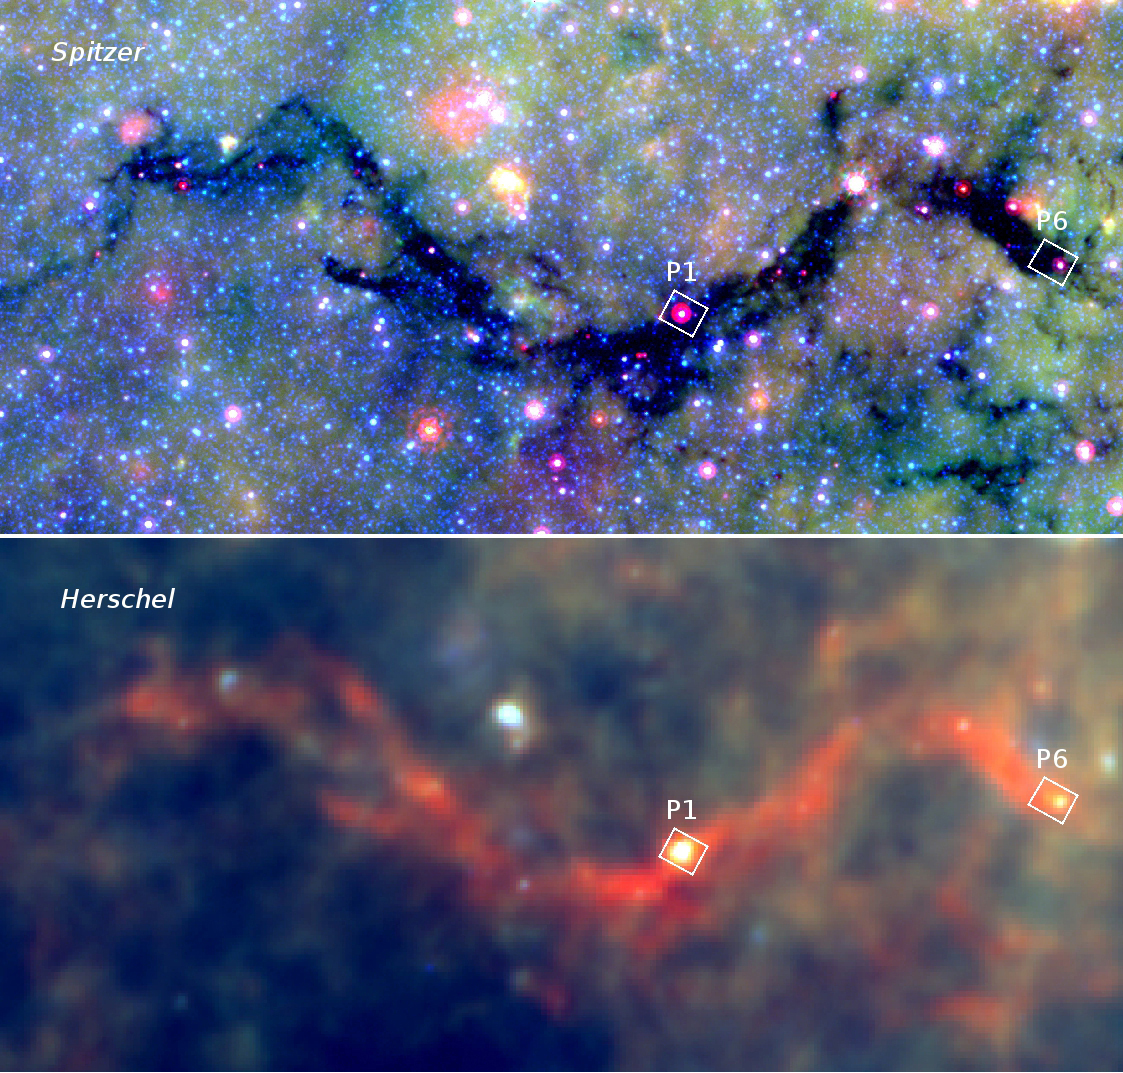 These two panels show the Snake nebula as photographed by the Spitzer and Herschel space telescopes. At mid-infrared wavelengths (the upper panel taken by Spitzer), the thick nebular material blocks light from more distant stars. At far-infrared wavelengths, however (the lower panel taken by Herschel), the nebula glows due to emission from cold dust. The two boxed regions, P1 and P6, were examined in more detail by the Submillimeter Array (SMA).